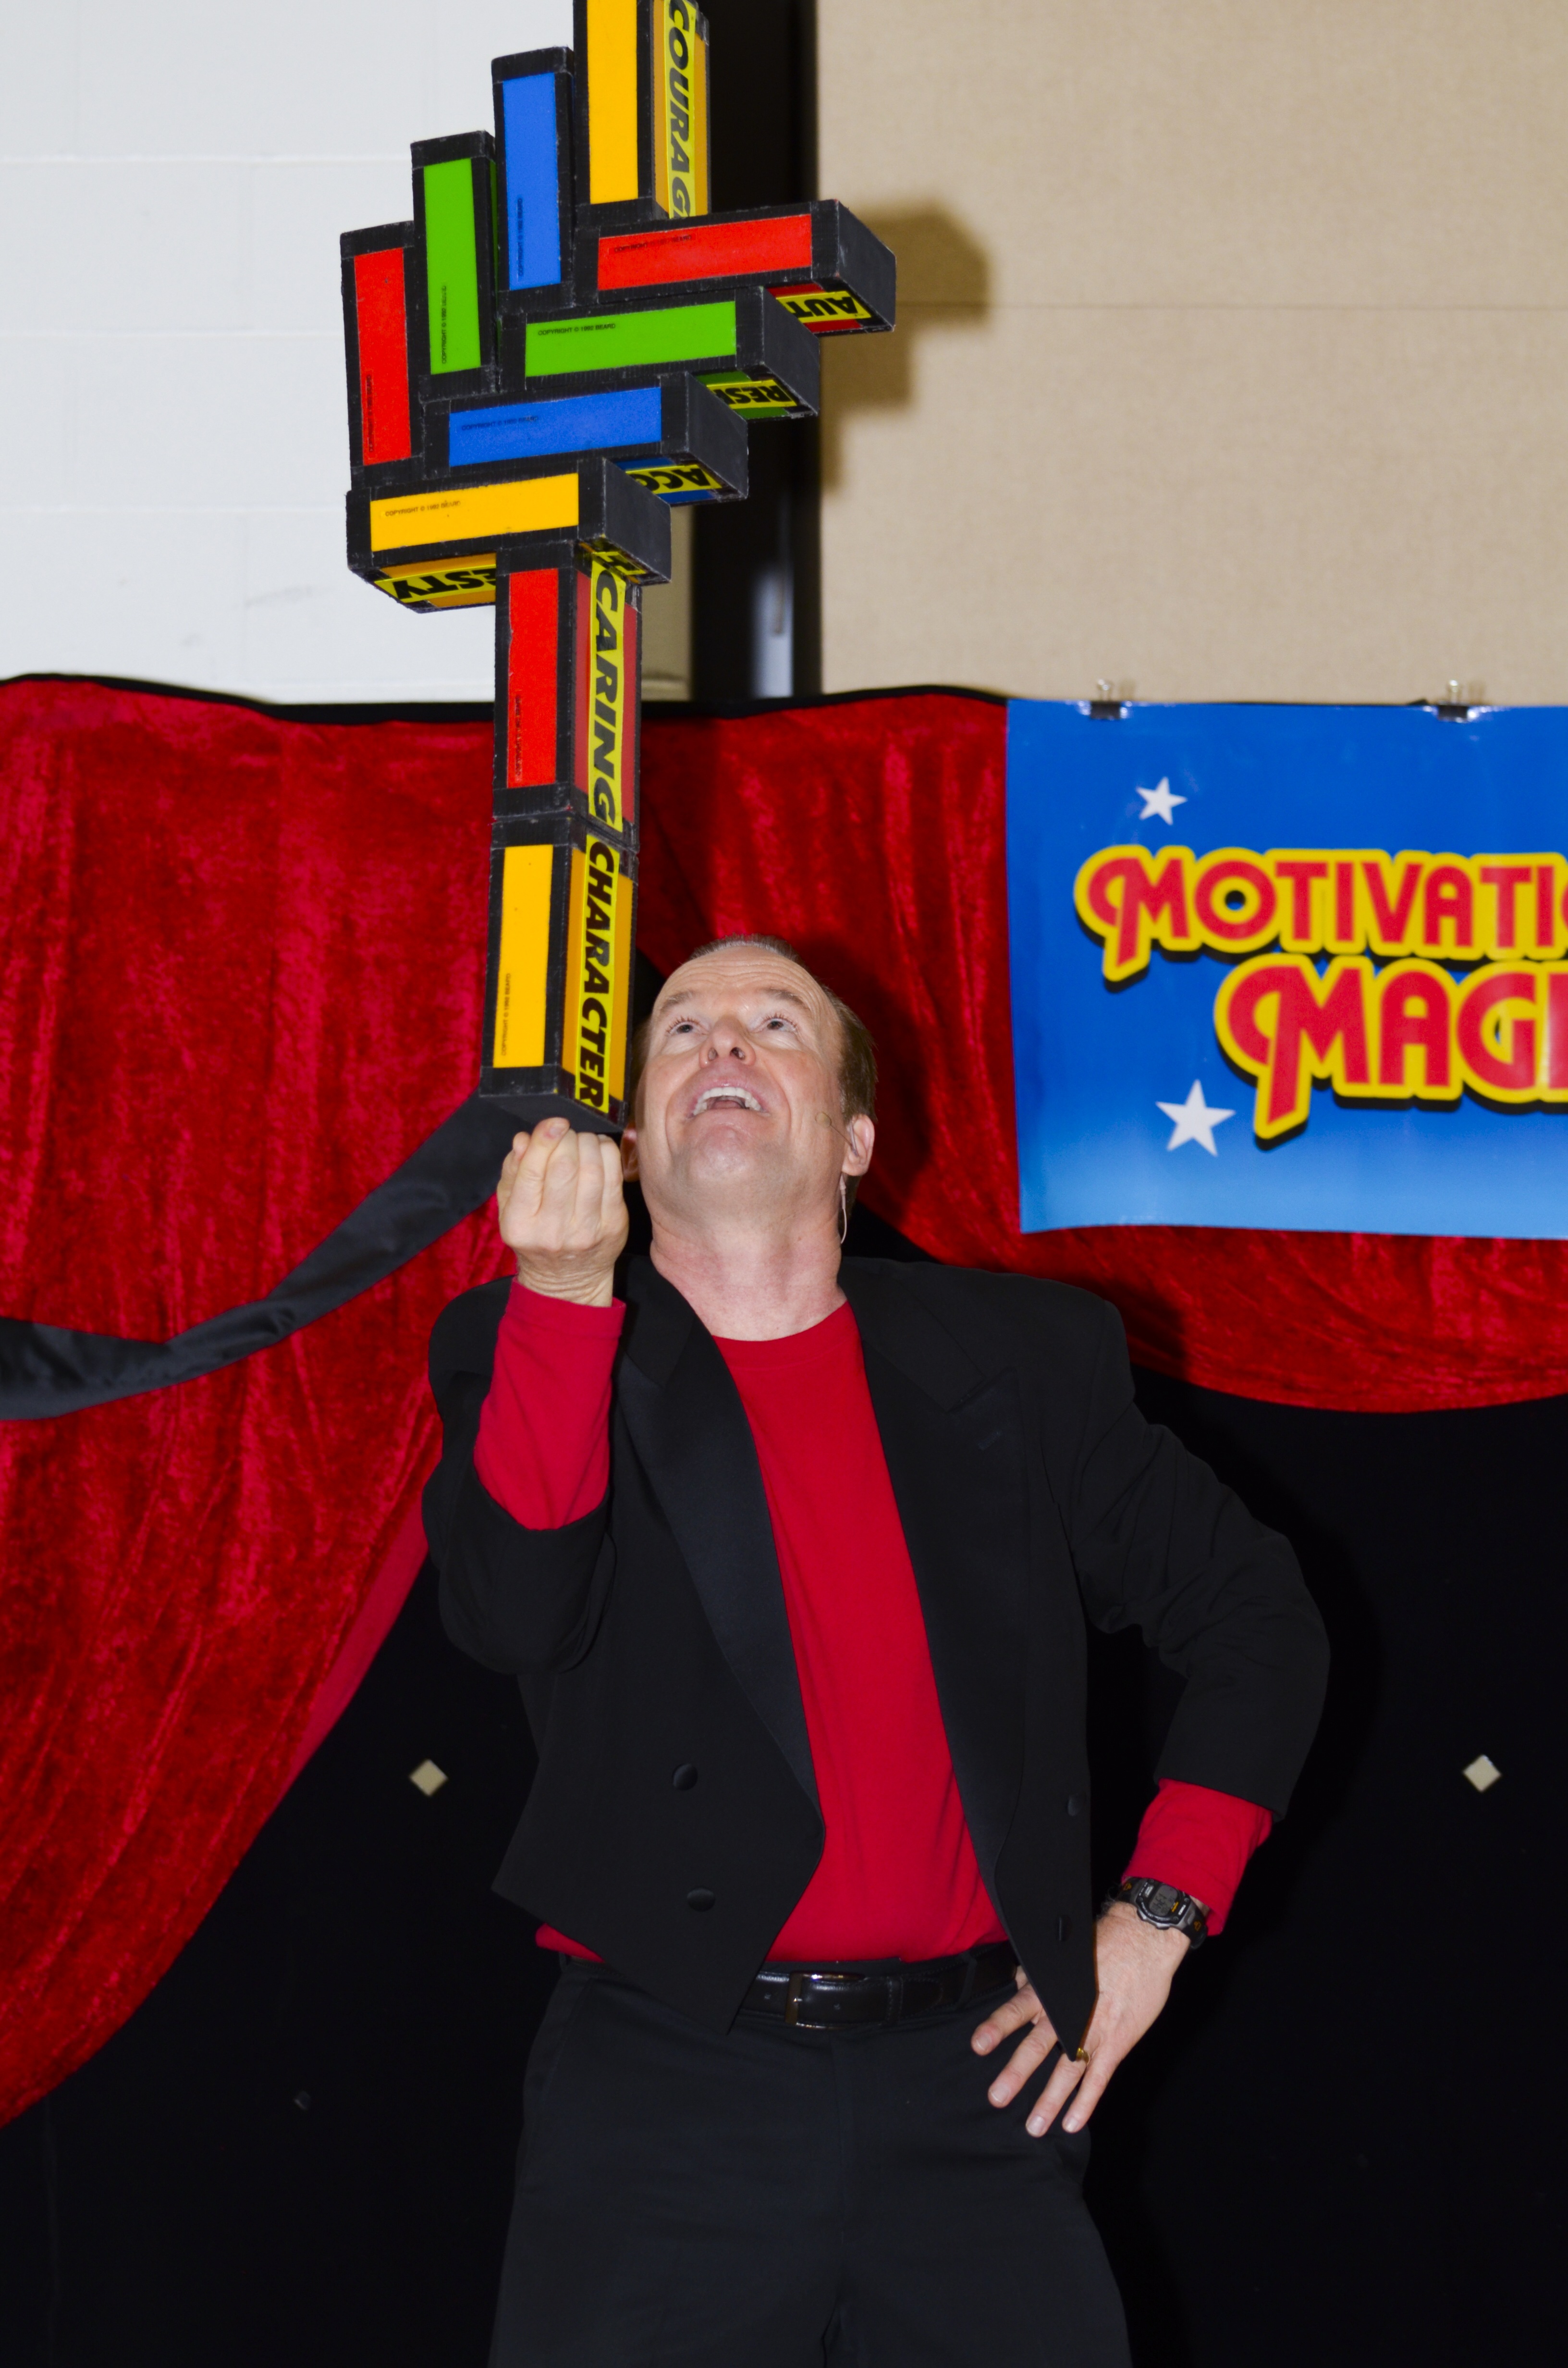 MAGICAL MESSAGE -  Magician Steve Harmer performs his motivational magic routine for the students of Grandview Elementary School.